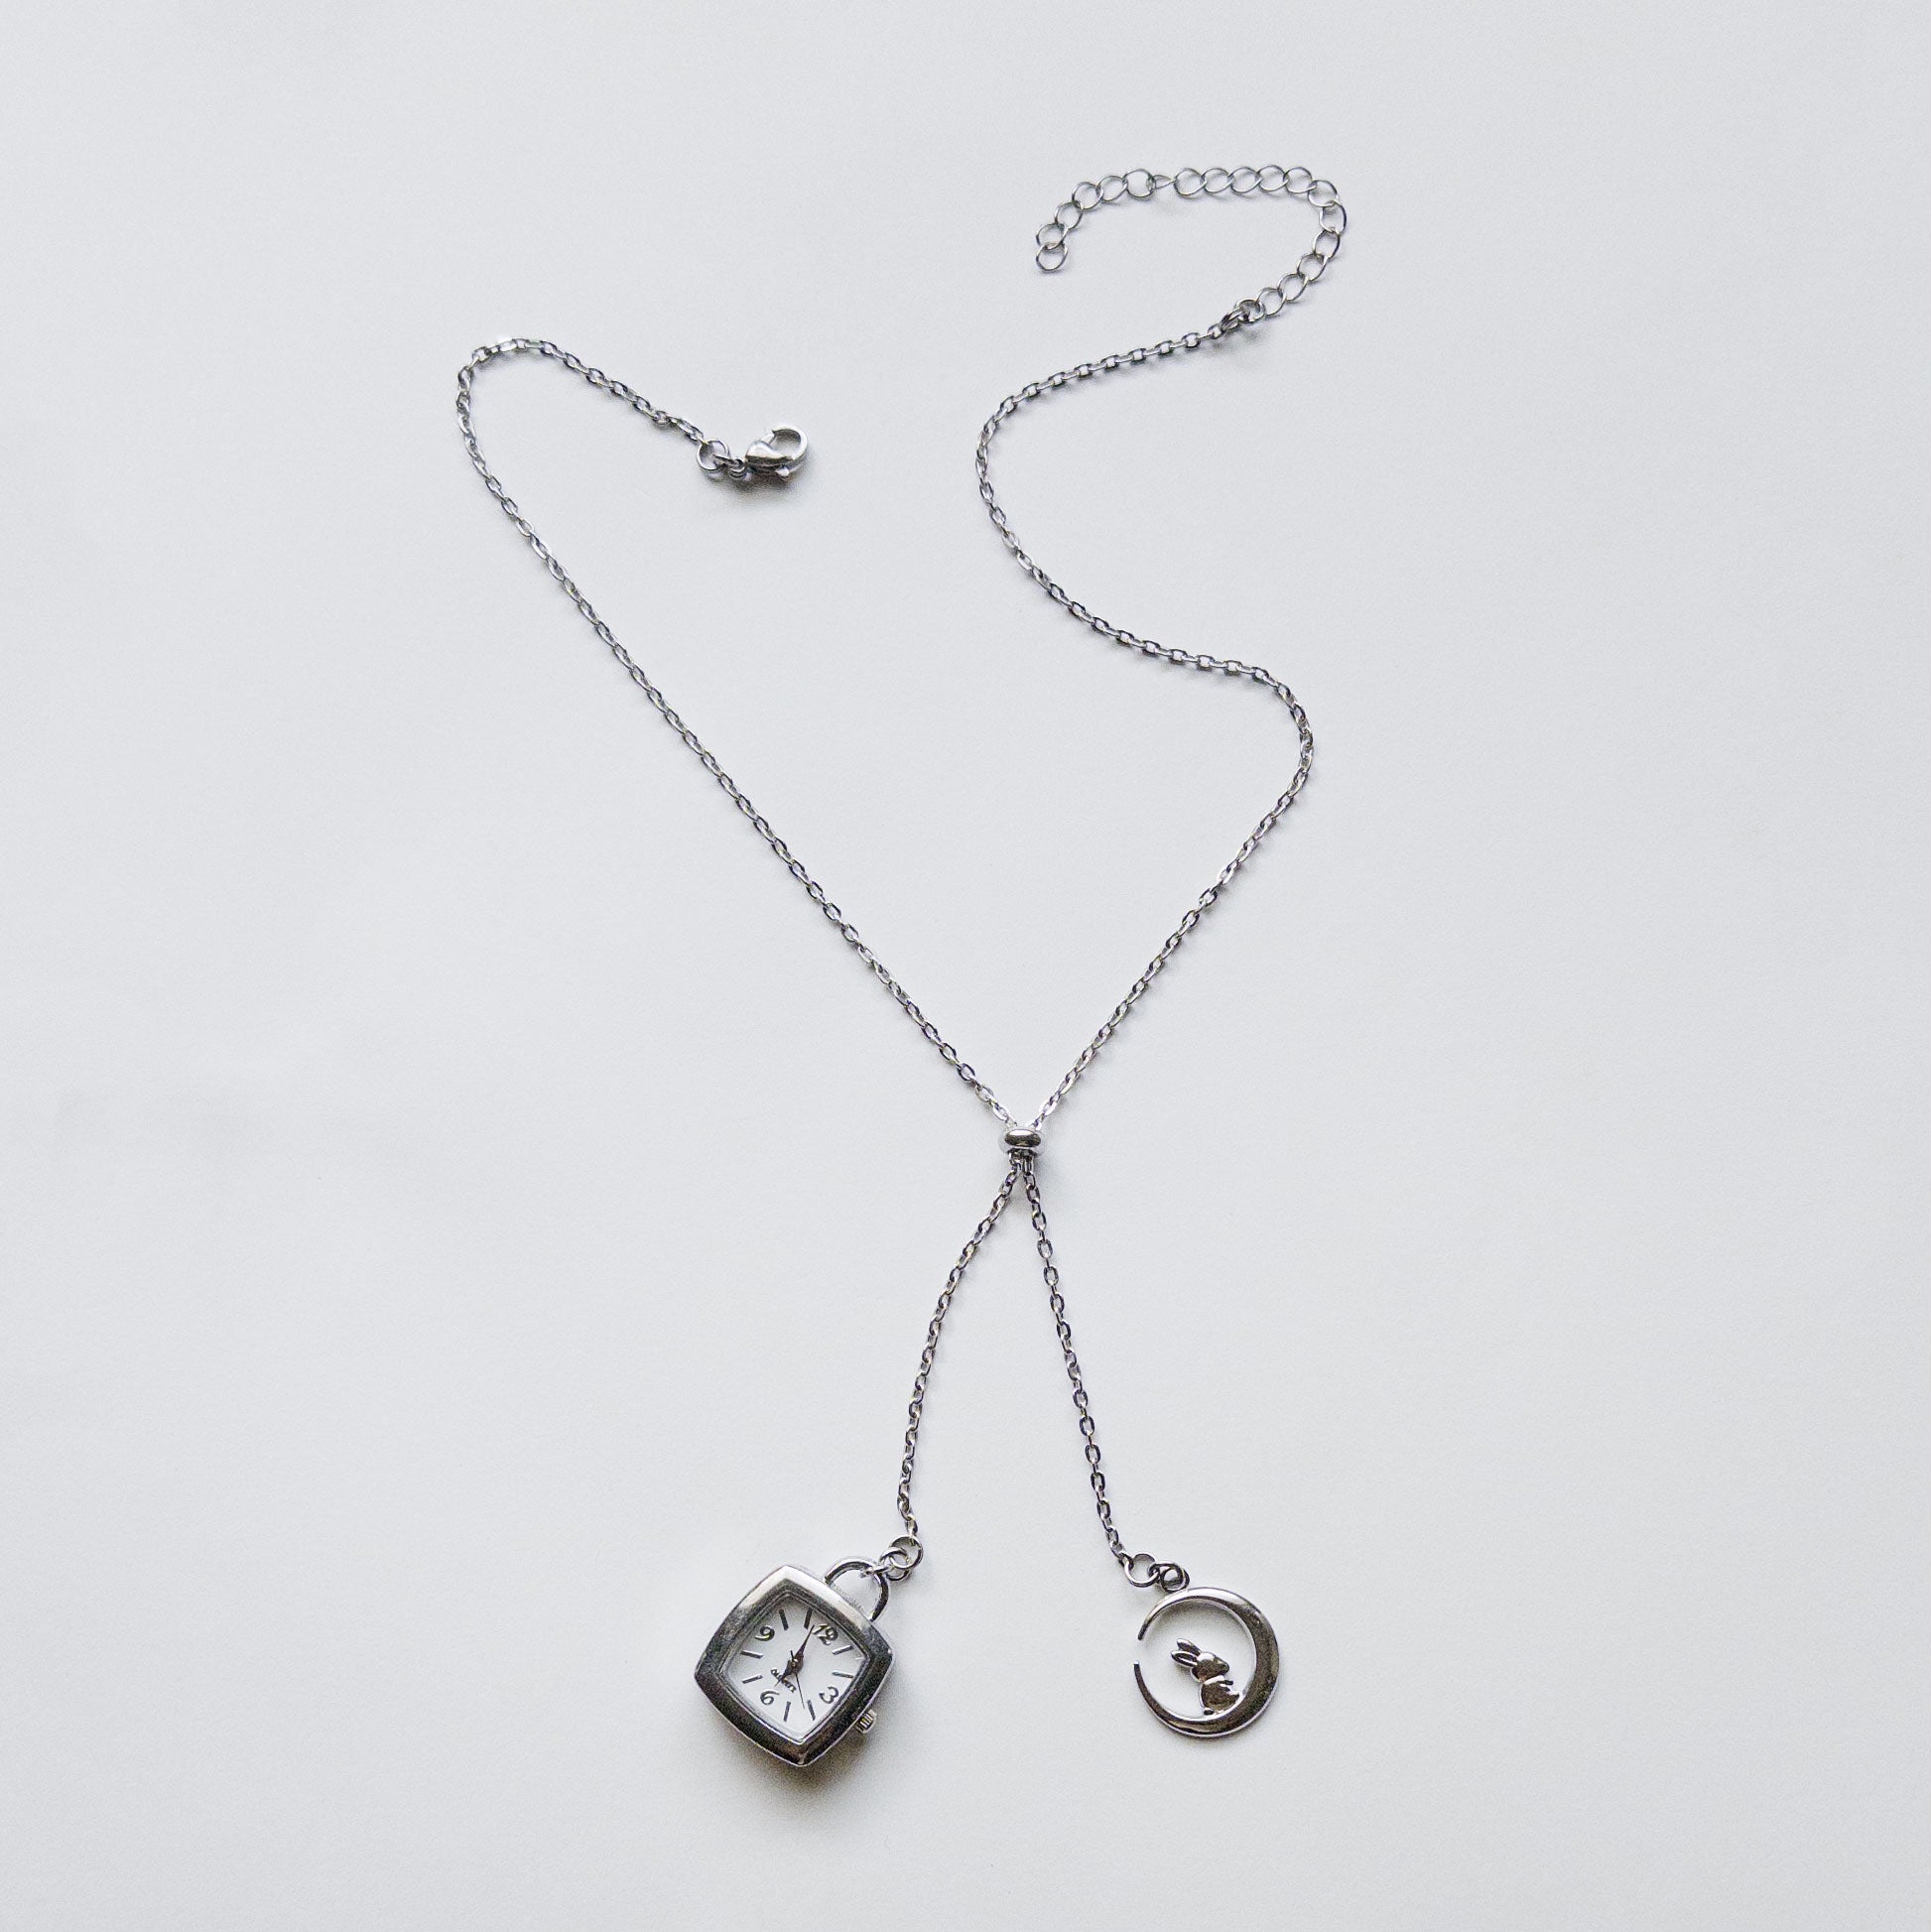 Adjustable sliding lariat watch necklace stainless steel